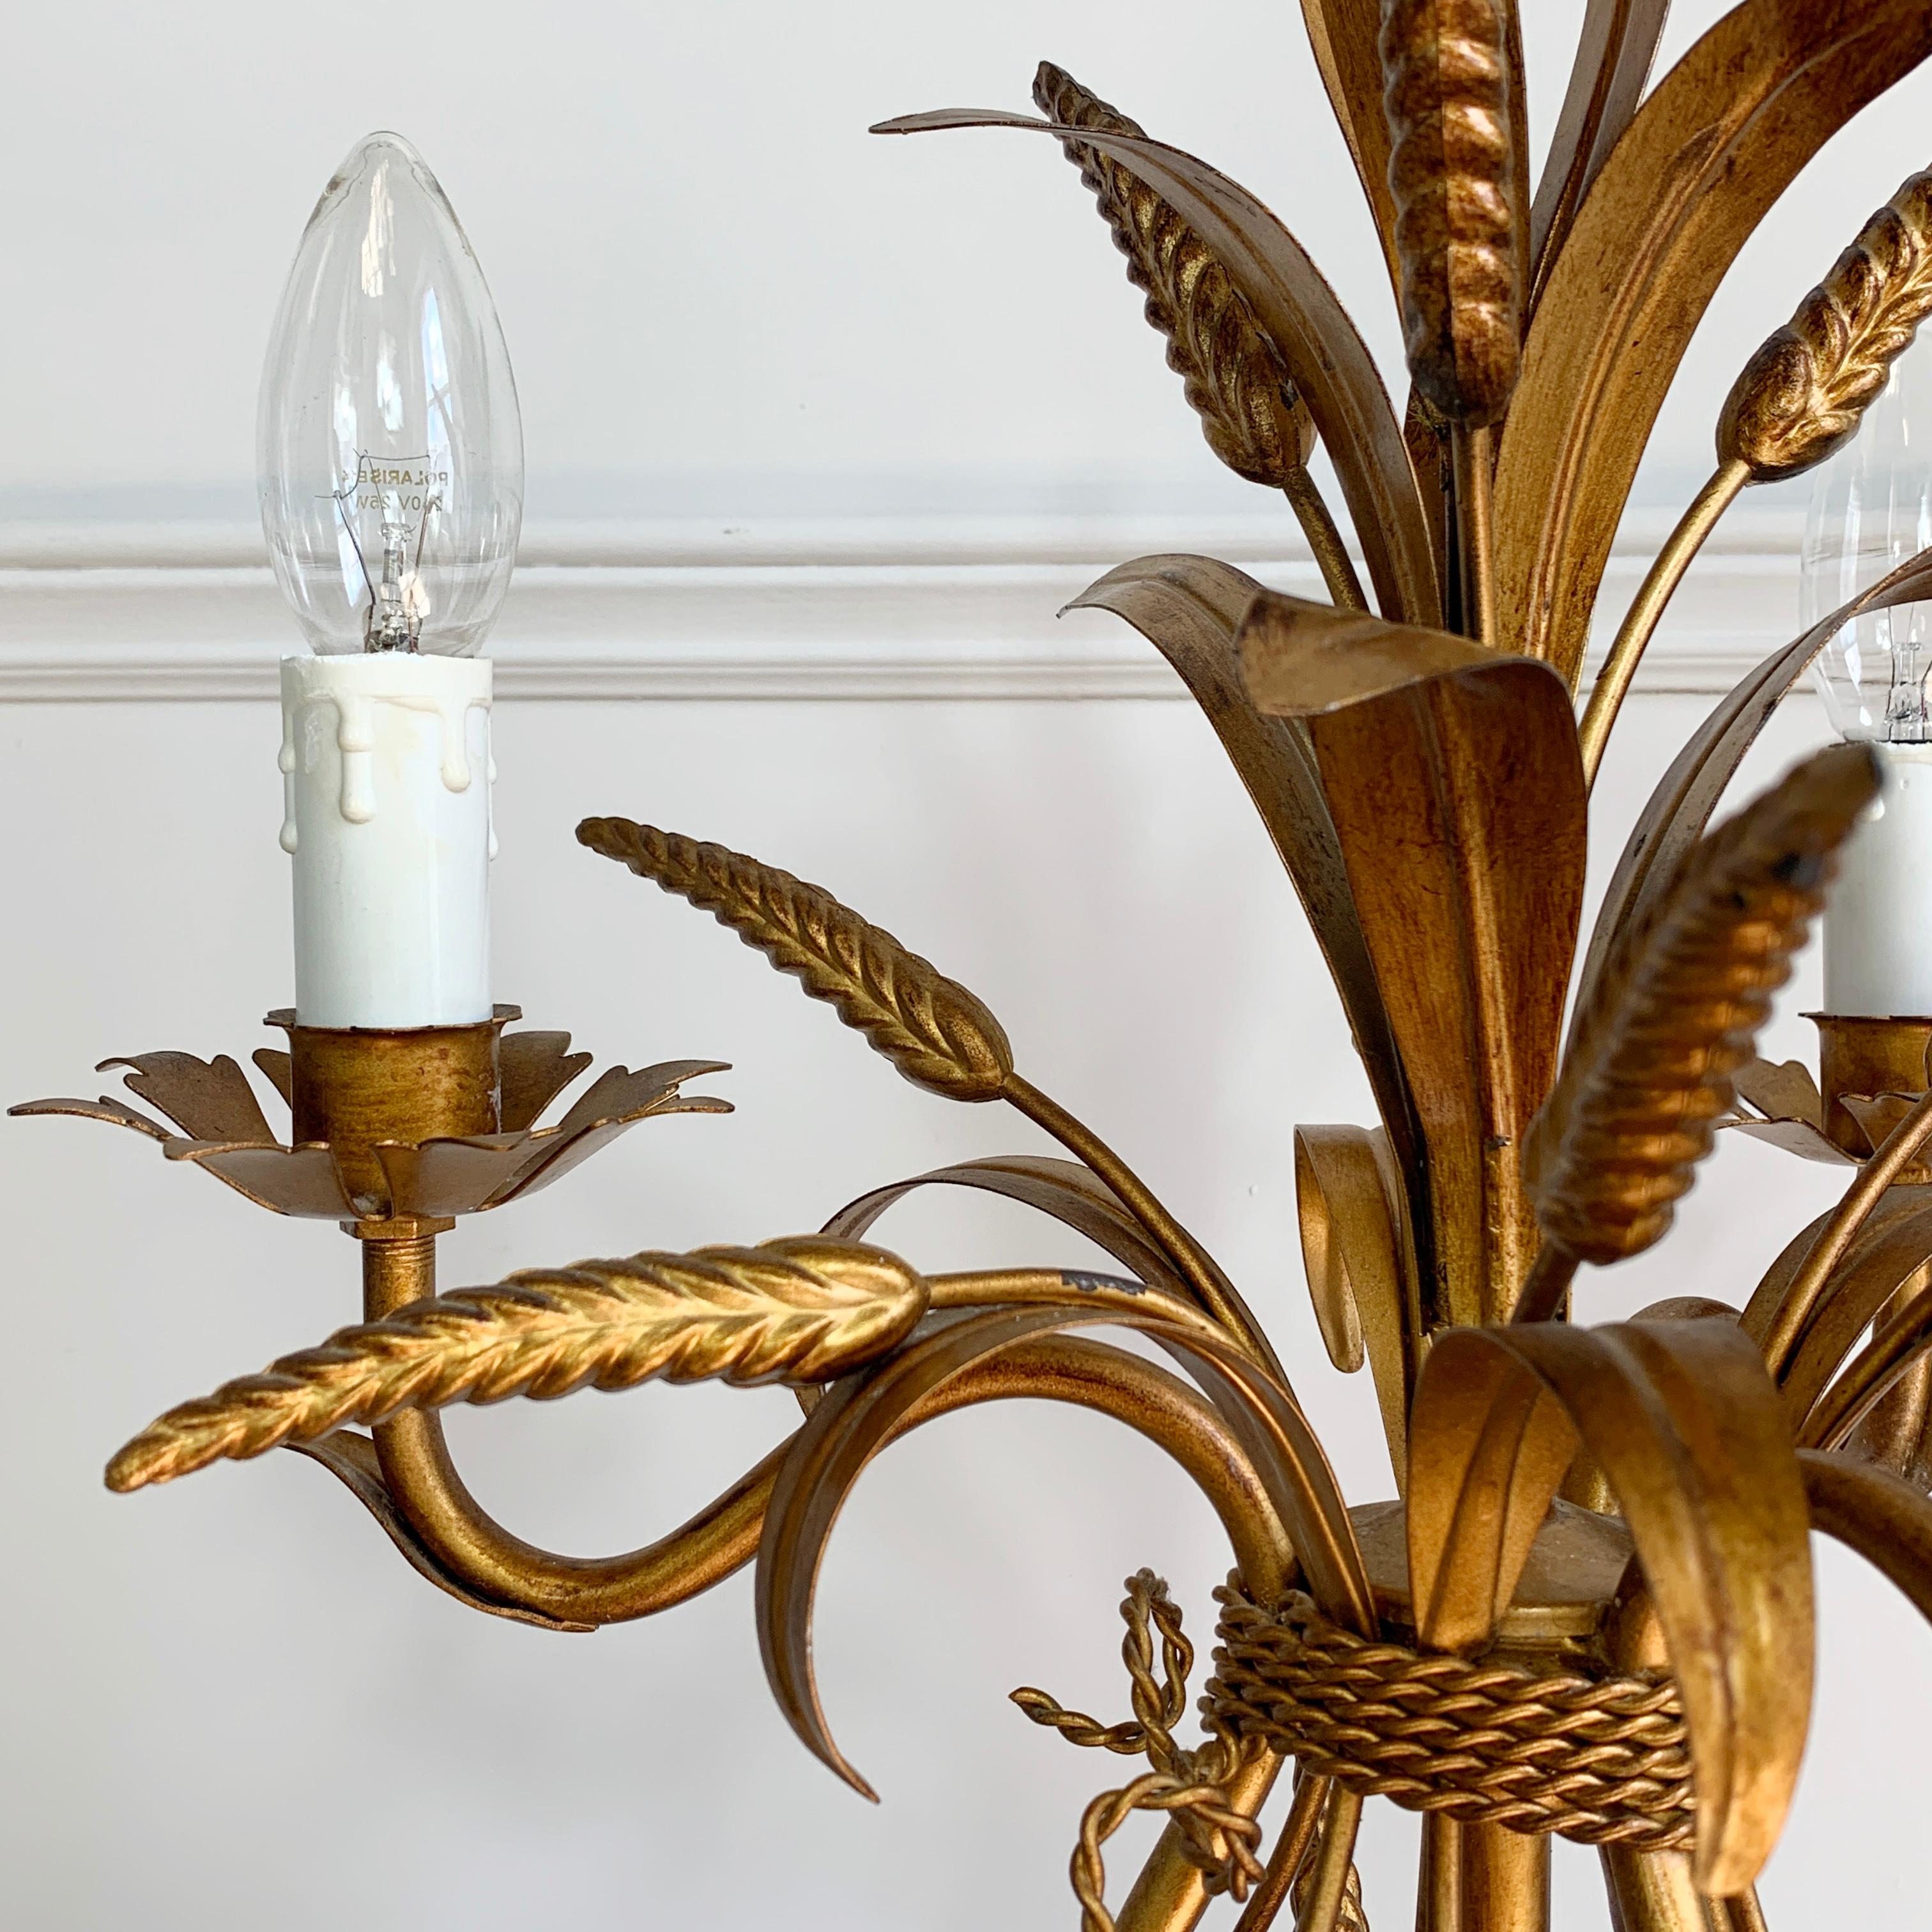 Hans Kögl wheat sheaf table lamp, circa 1970s
Statement Wheatsheaf and gilt leaf lamp by Hans Kögl
65cm height, 35cm width, base 19cm width
The lead has an inline switch for ease of use
3 lampholders with faux candle covers, e14 lamp